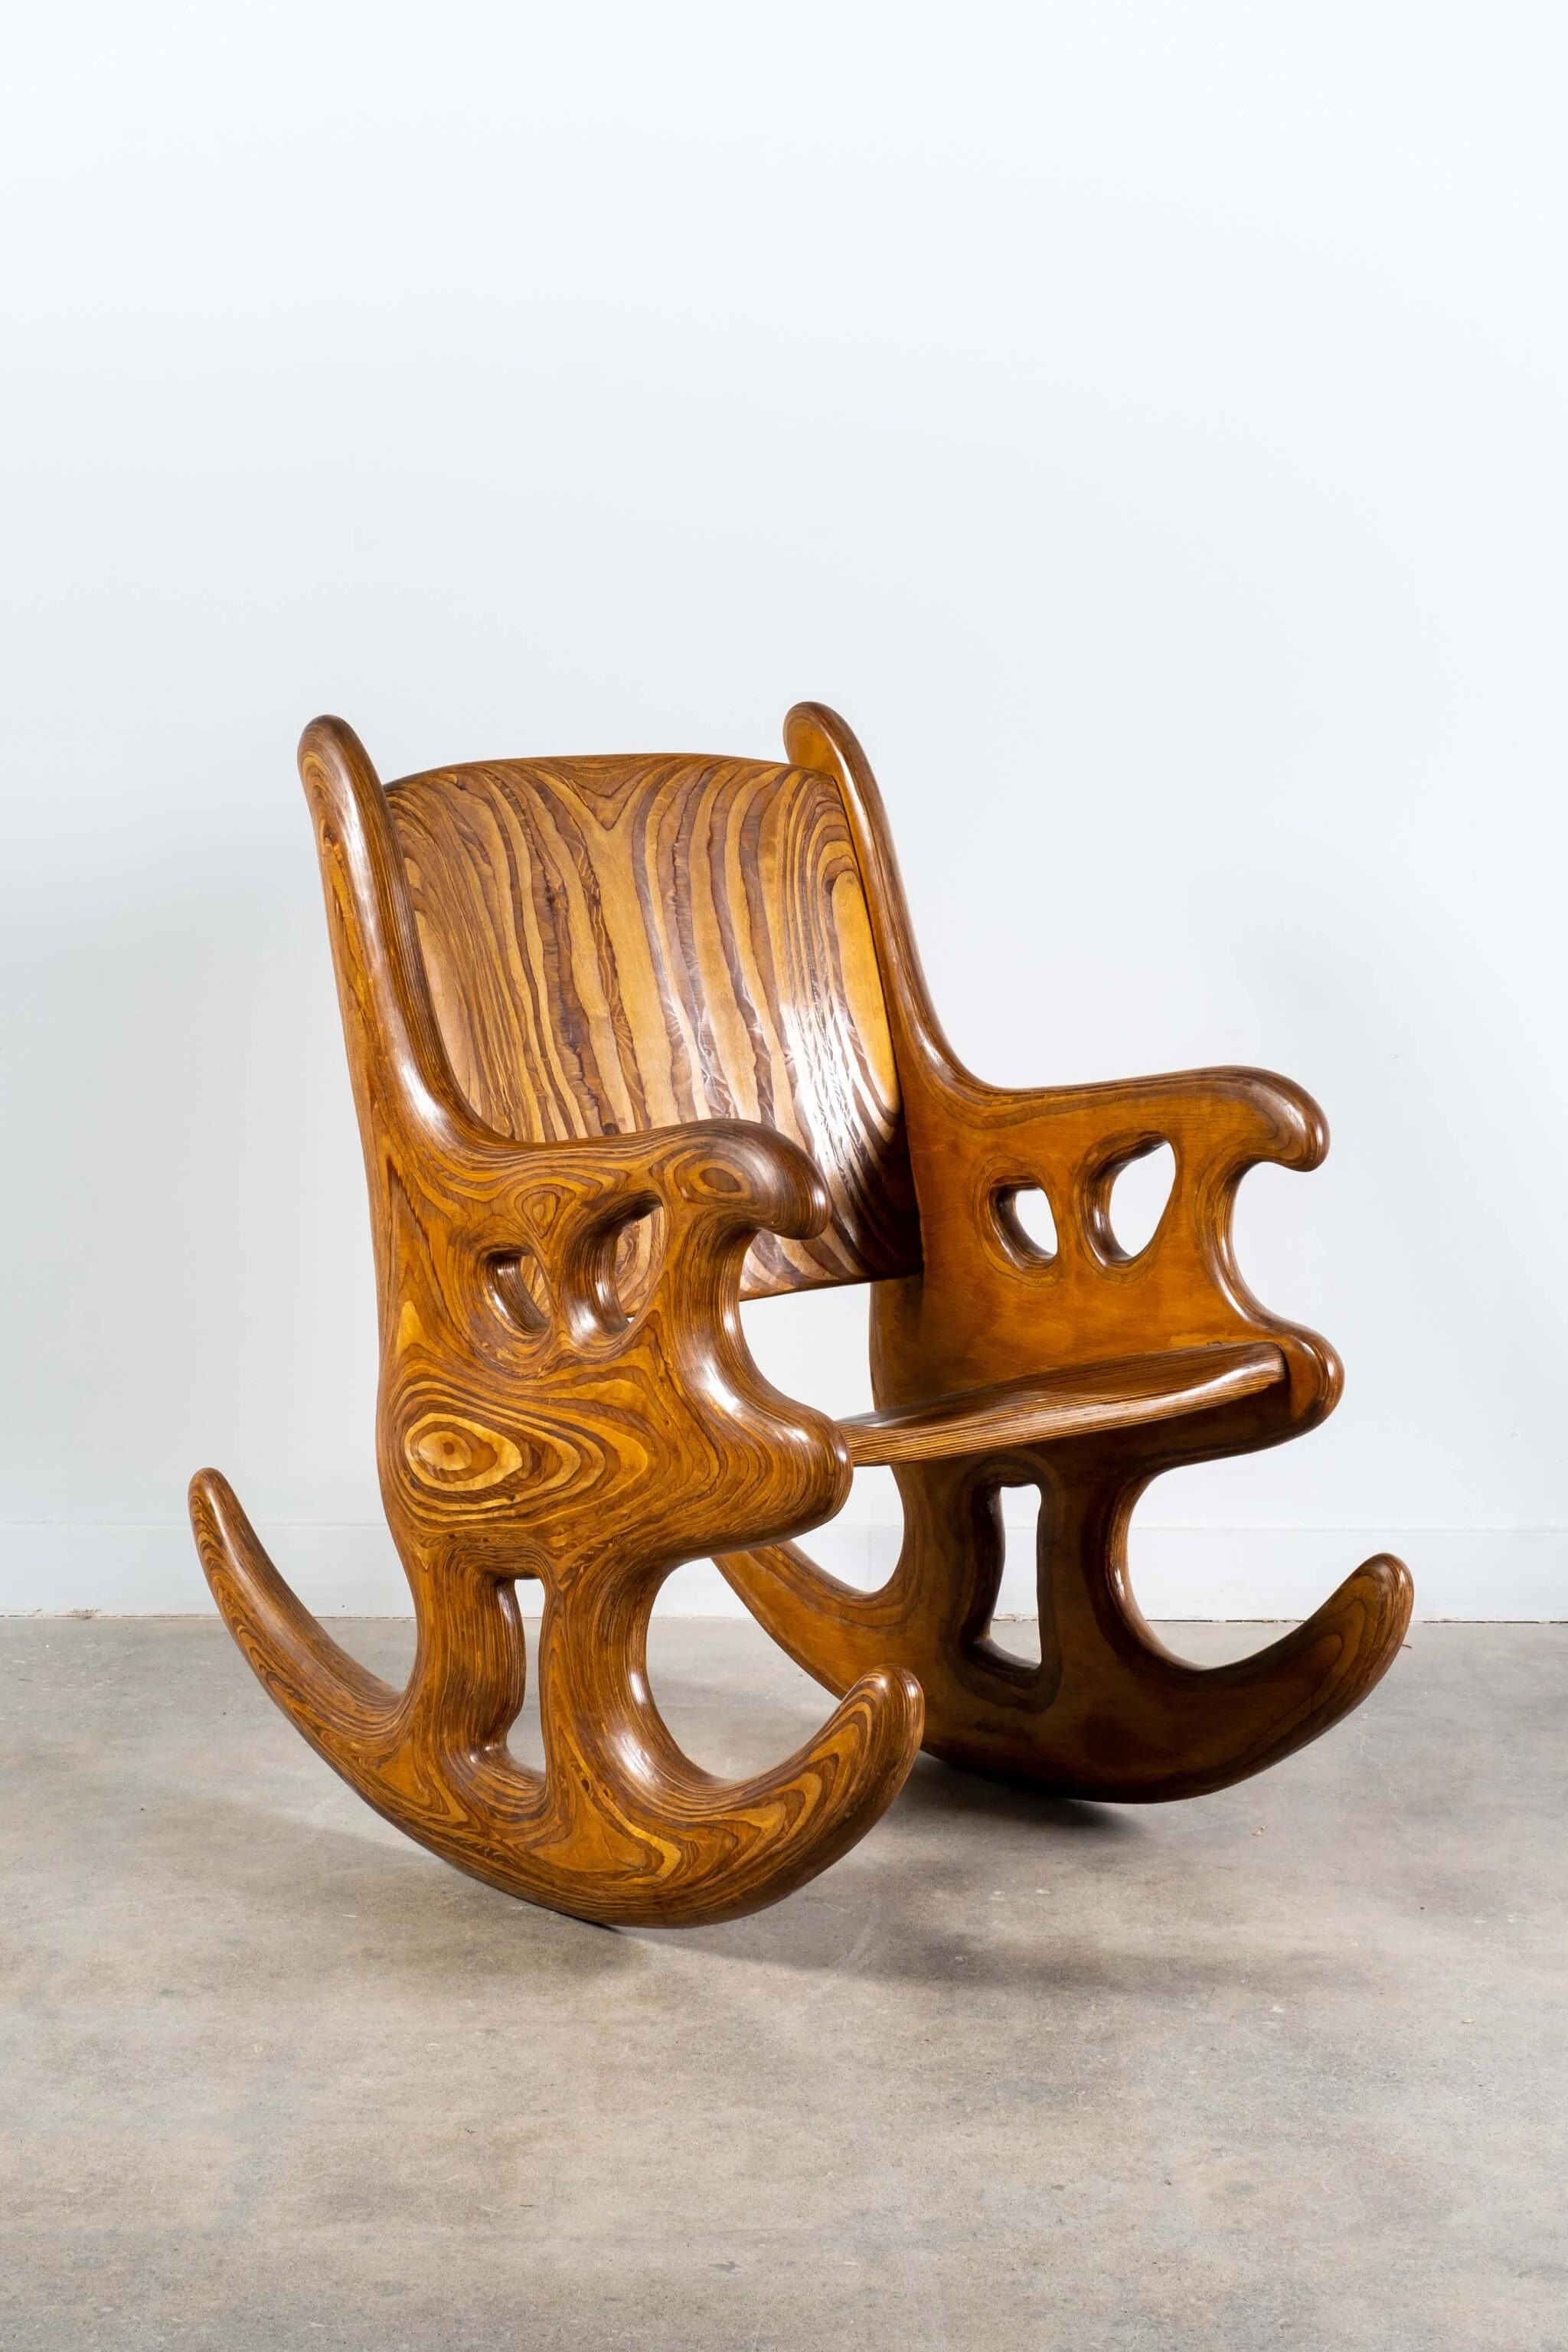 American Studio Made Laminated Wood Rocking Chair by Douglas Hackett For Sale